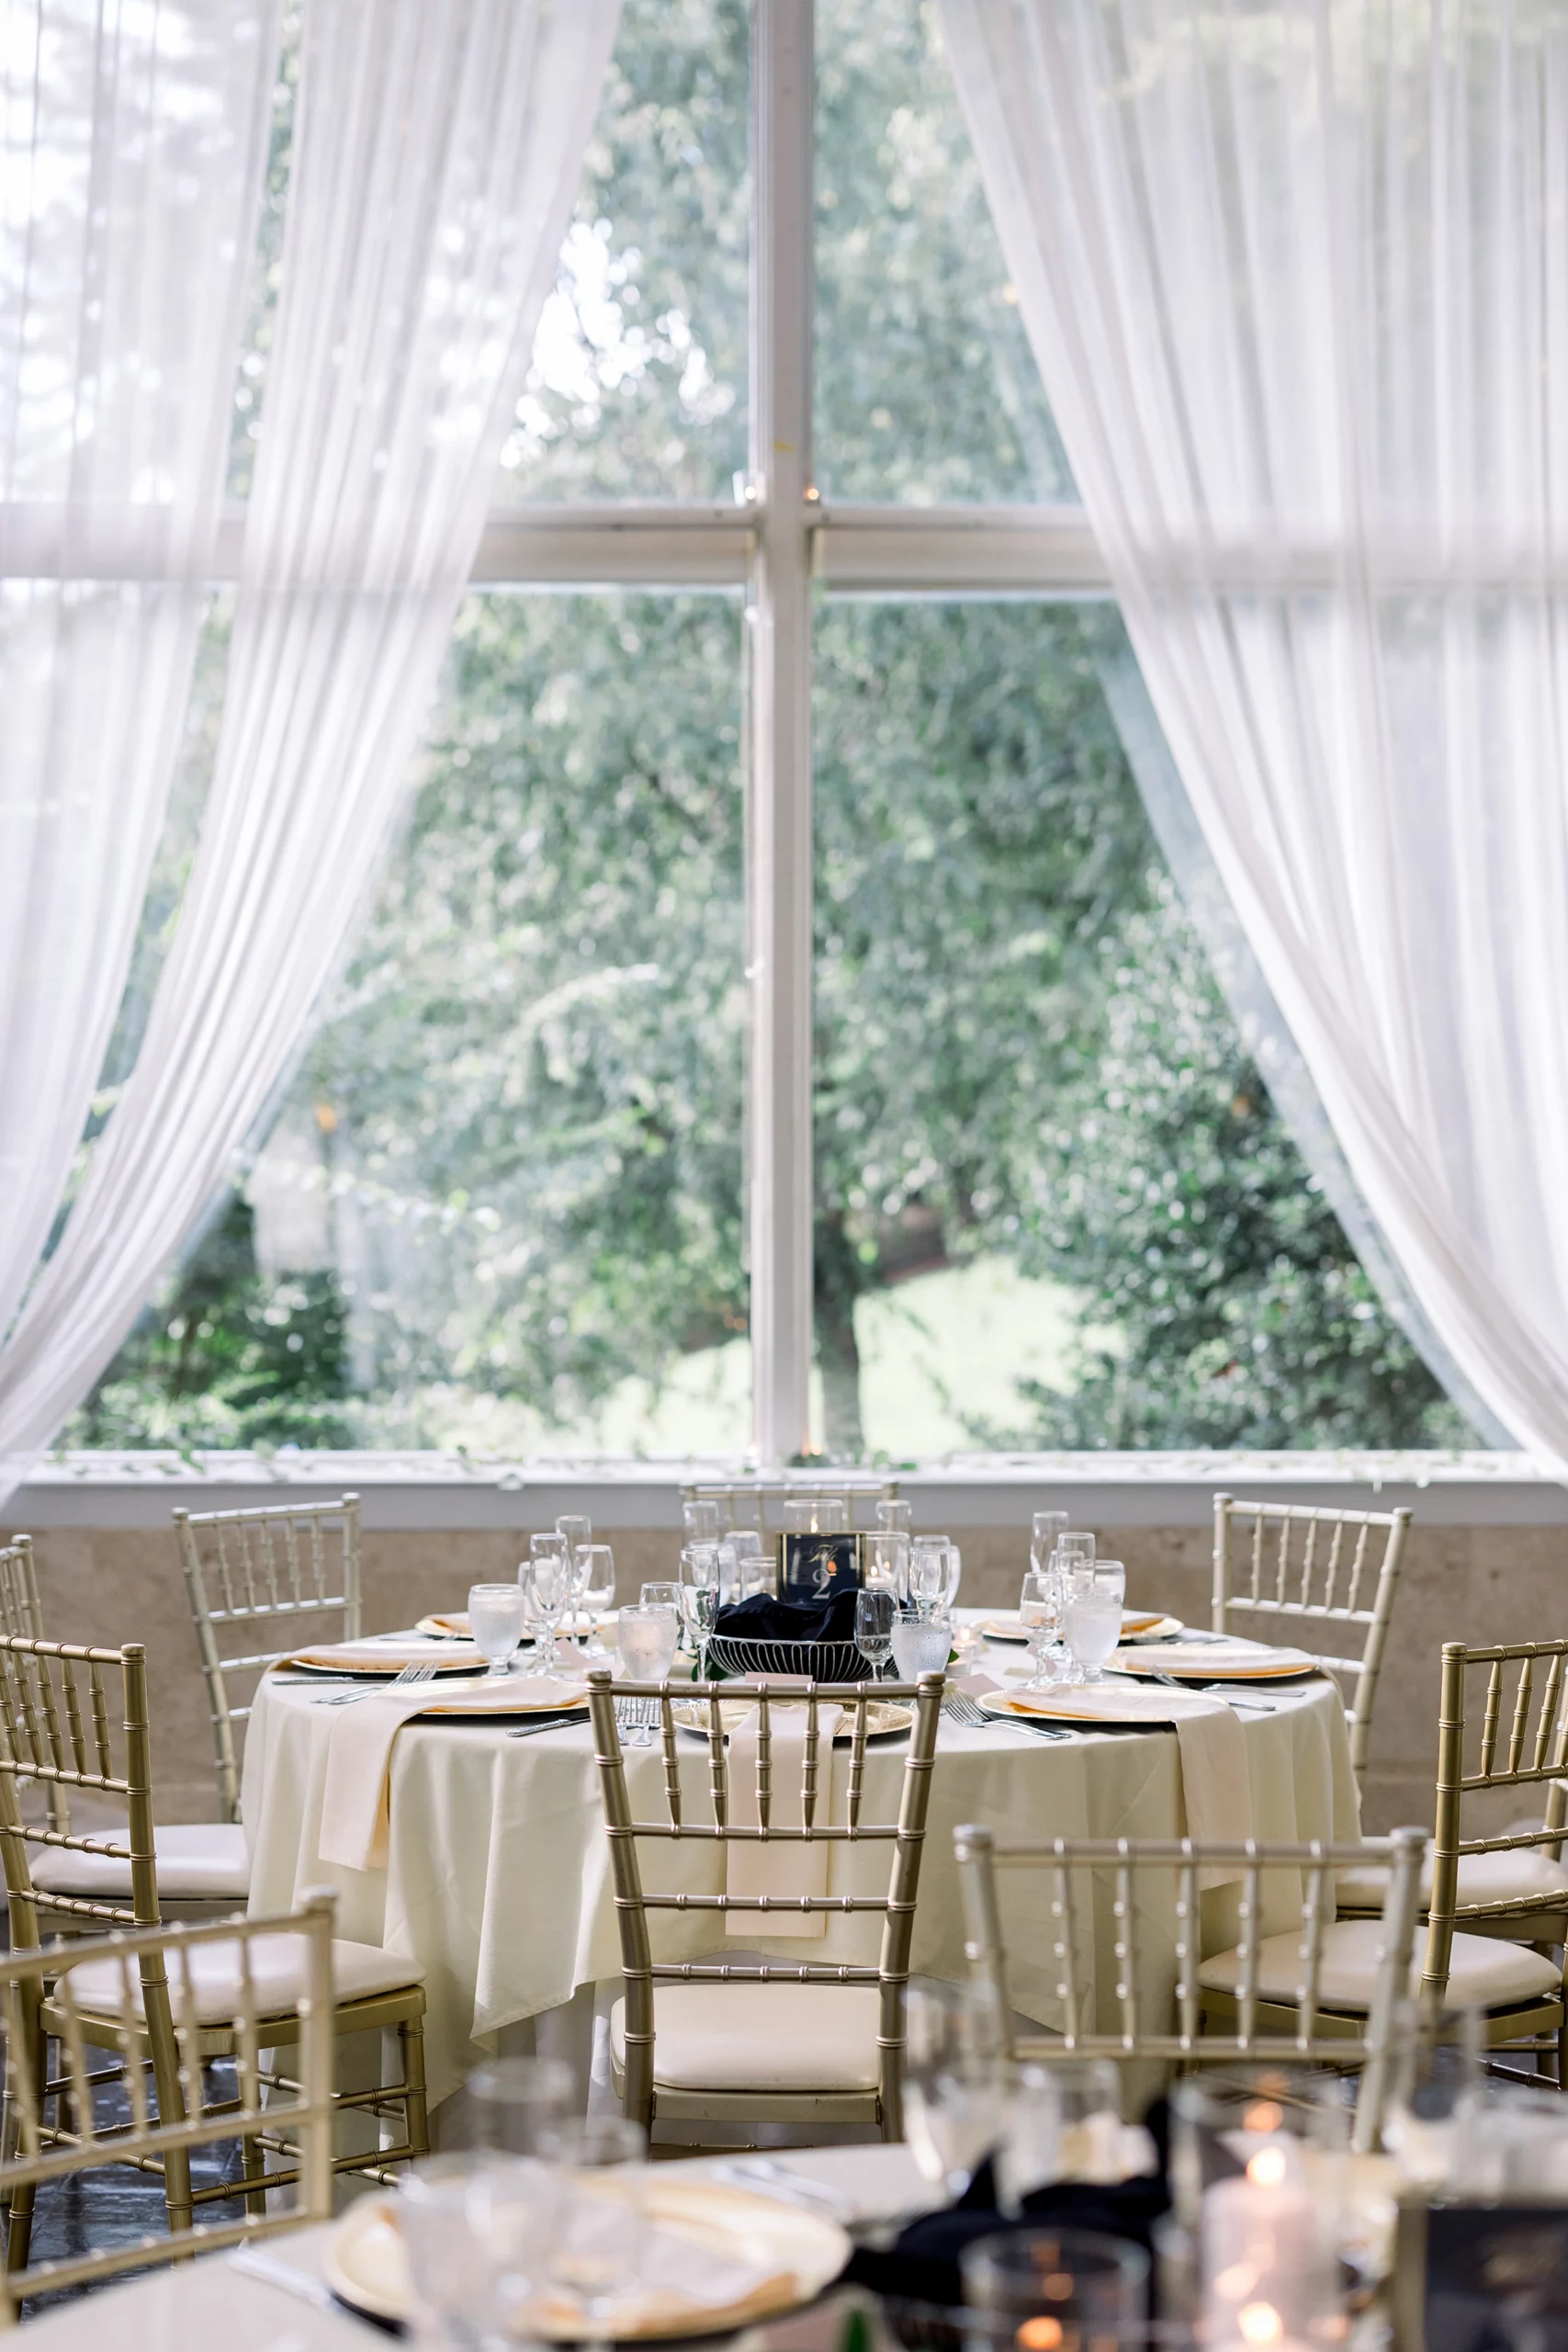 A table setting under a window for a wedding reception